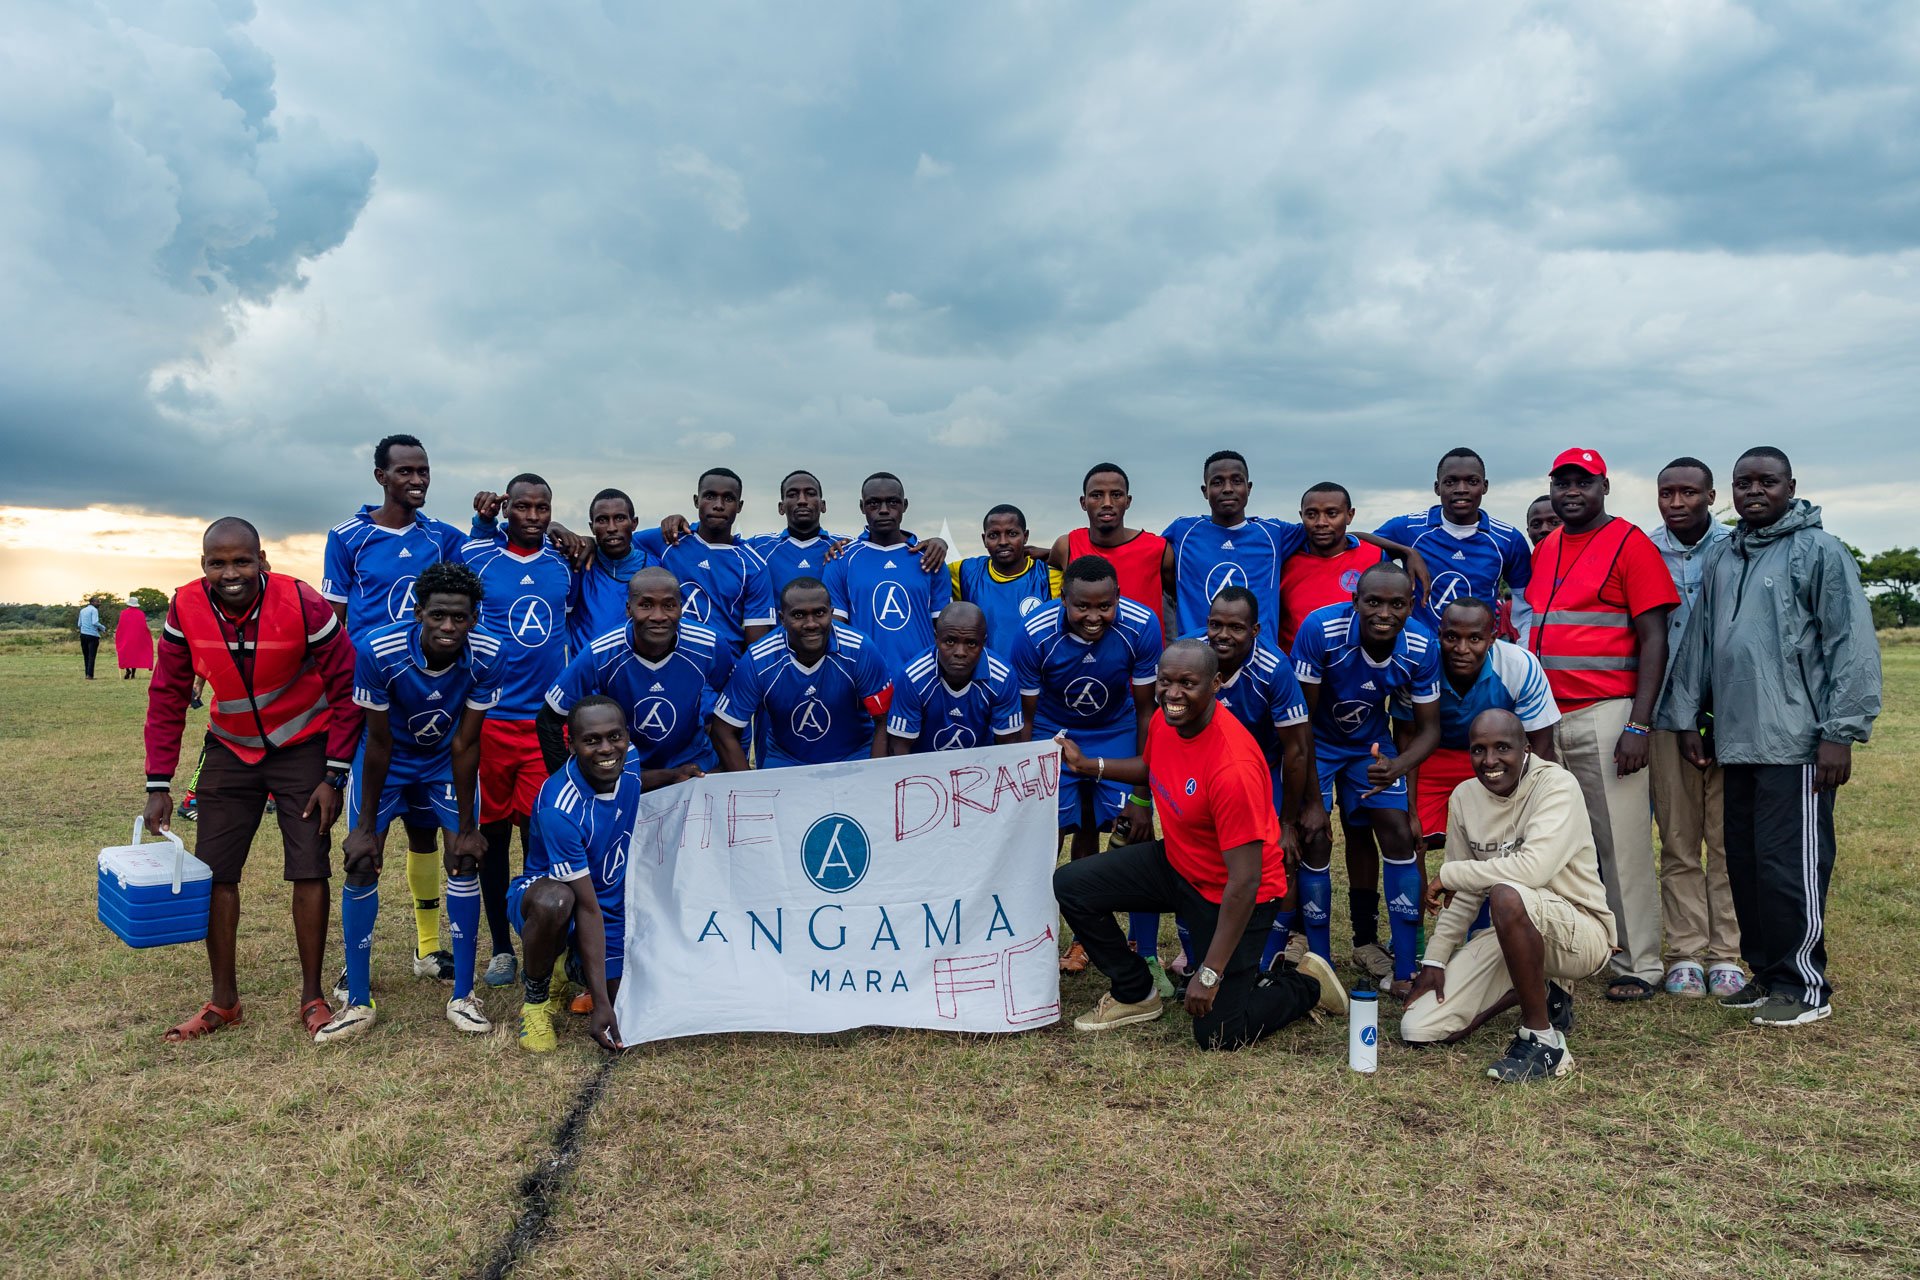 Leading Angama Football Club to victory in the 2022 Mara Cup